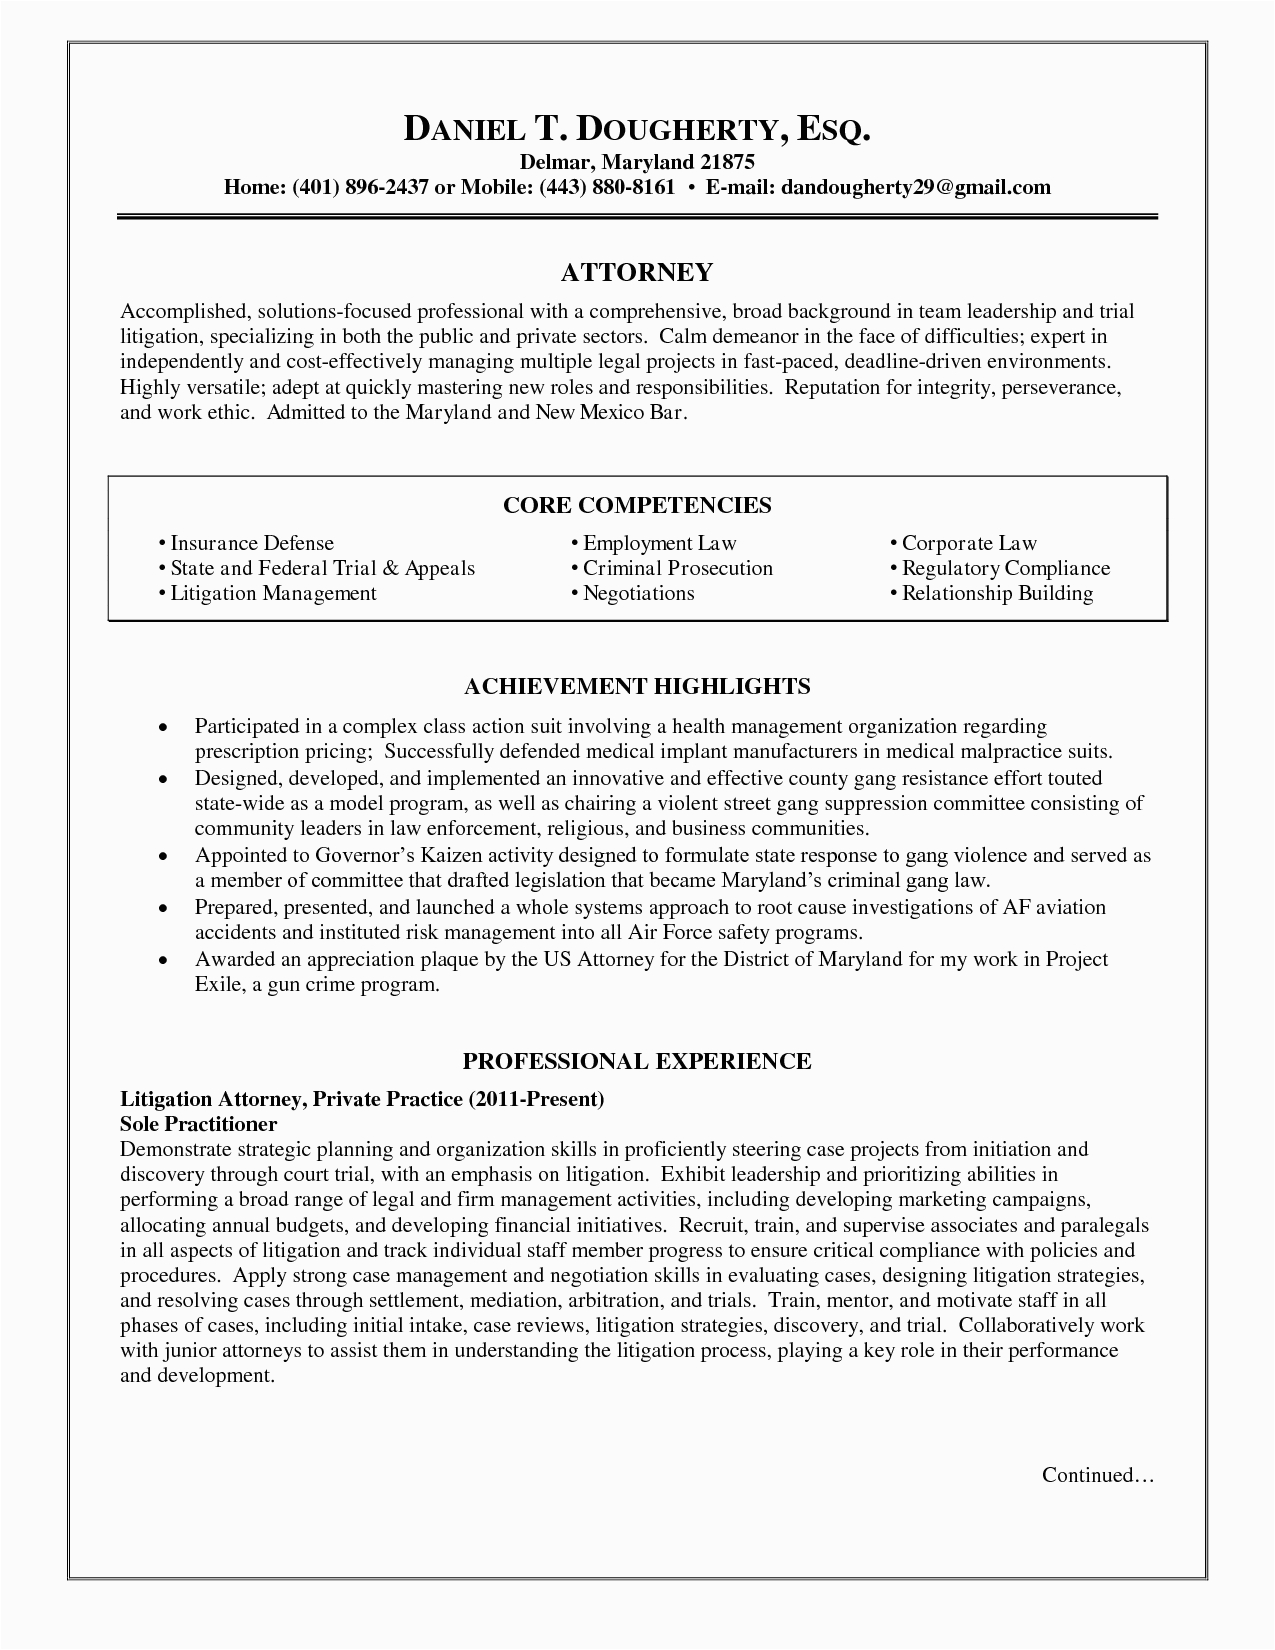 Labor and Employment attorney Resume Sample Personal Injury attorney Resume Samples